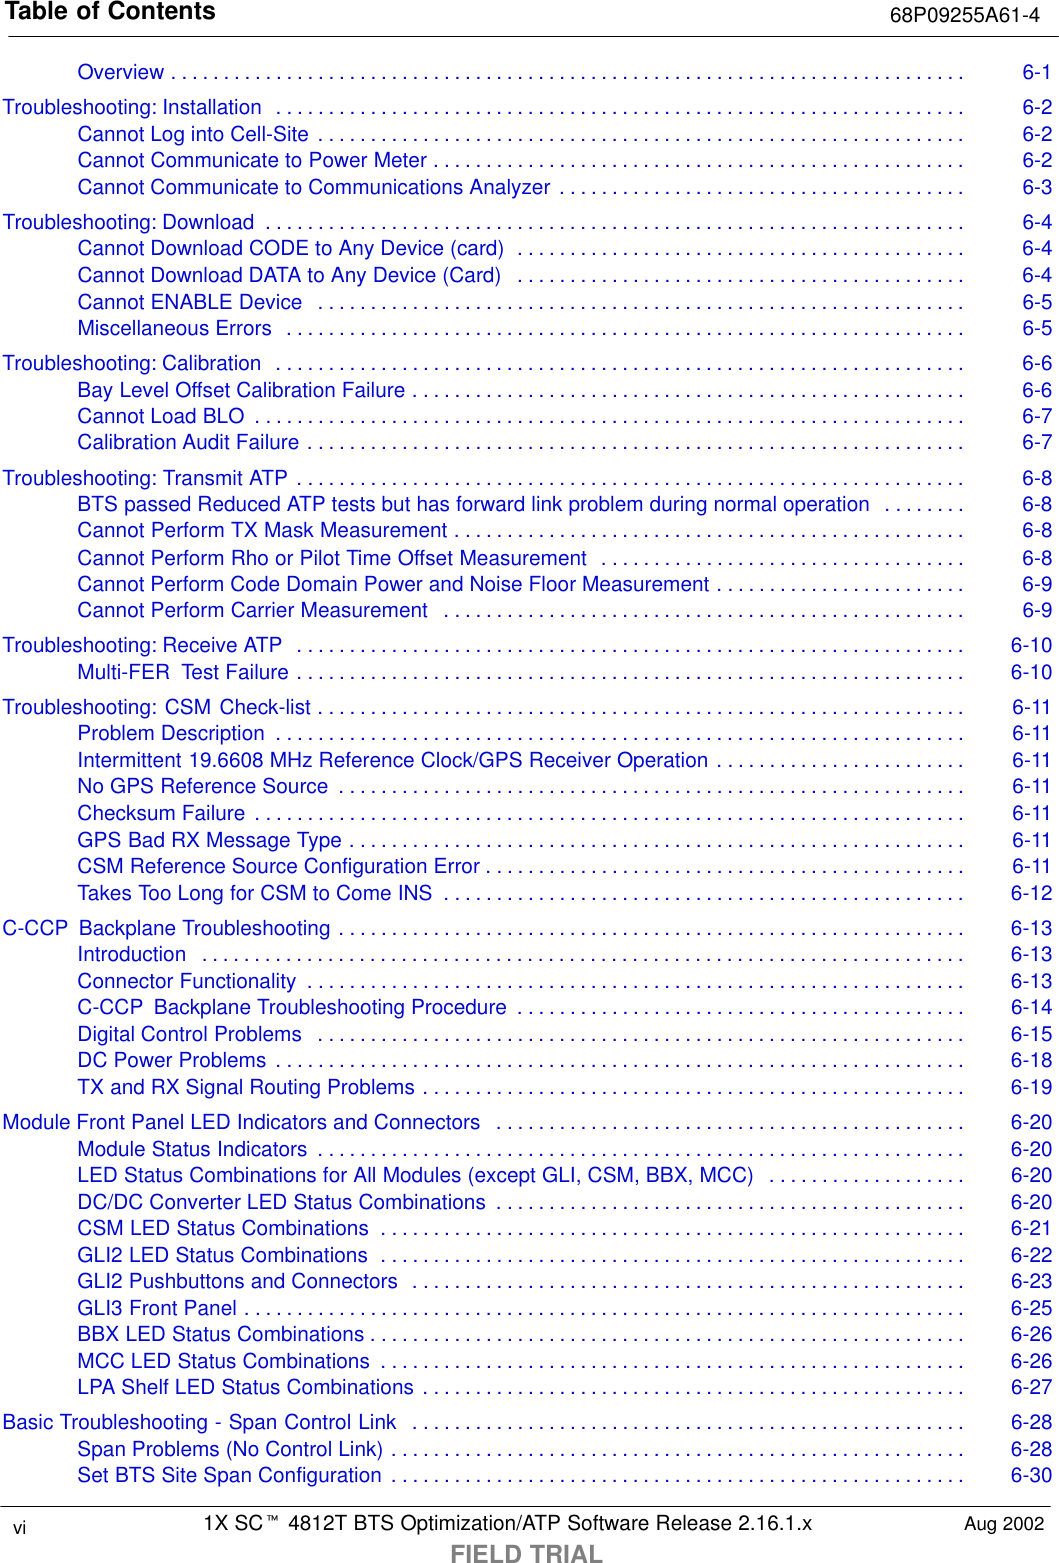 Table of Contents 68P09255A61-41X SCt 4812T BTS Optimization/ATP Software Release 2.16.1.xFIELD TRIALvi Aug 2002Overview 6-1. . . . . . . . . . . . . . . . . . . . . . . . . . . . . . . . . . . . . . . . . . . . . . . . . . . . . . . . . . . . . . . . . . . . . . . . . . . . Troubleshooting: Installation 6-2. . . . . . . . . . . . . . . . . . . . . . . . . . . . . . . . . . . . . . . . . . . . . . . . . . . . . . . . . . . . . . . . . . Cannot Log into Cell-Site 6-2. . . . . . . . . . . . . . . . . . . . . . . . . . . . . . . . . . . . . . . . . . . . . . . . . . . . . . . . . . . . . . Cannot Communicate to Power Meter 6-2. . . . . . . . . . . . . . . . . . . . . . . . . . . . . . . . . . . . . . . . . . . . . . . . . . . Cannot Communicate to Communications Analyzer 6-3. . . . . . . . . . . . . . . . . . . . . . . . . . . . . . . . . . . . . . . Troubleshooting: Download 6-4. . . . . . . . . . . . . . . . . . . . . . . . . . . . . . . . . . . . . . . . . . . . . . . . . . . . . . . . . . . . . . . . . . . Cannot Download CODE to Any Device (card) 6-4. . . . . . . . . . . . . . . . . . . . . . . . . . . . . . . . . . . . . . . . . . . Cannot Download DATA to Any Device (Card) 6-4. . . . . . . . . . . . . . . . . . . . . . . . . . . . . . . . . . . . . . . . . . . Cannot ENABLE Device 6-5. . . . . . . . . . . . . . . . . . . . . . . . . . . . . . . . . . . . . . . . . . . . . . . . . . . . . . . . . . . . . . Miscellaneous Errors 6-5. . . . . . . . . . . . . . . . . . . . . . . . . . . . . . . . . . . . . . . . . . . . . . . . . . . . . . . . . . . . . . . . . Troubleshooting: Calibration 6-6. . . . . . . . . . . . . . . . . . . . . . . . . . . . . . . . . . . . . . . . . . . . . . . . . . . . . . . . . . . . . . . . . . Bay Level Offset Calibration Failure 6-6. . . . . . . . . . . . . . . . . . . . . . . . . . . . . . . . . . . . . . . . . . . . . . . . . . . . . Cannot Load BLO 6-7. . . . . . . . . . . . . . . . . . . . . . . . . . . . . . . . . . . . . . . . . . . . . . . . . . . . . . . . . . . . . . . . . . . . Calibration Audit Failure 6-7. . . . . . . . . . . . . . . . . . . . . . . . . . . . . . . . . . . . . . . . . . . . . . . . . . . . . . . . . . . . . . . Troubleshooting: Transmit ATP 6-8. . . . . . . . . . . . . . . . . . . . . . . . . . . . . . . . . . . . . . . . . . . . . . . . . . . . . . . . . . . . . . . . BTS passed Reduced ATP tests but has forward link problem during normal operation 6-8. . . . . . . . Cannot Perform TX Mask Measurement 6-8. . . . . . . . . . . . . . . . . . . . . . . . . . . . . . . . . . . . . . . . . . . . . . . . . Cannot Perform Rho or Pilot Time Offset Measurement 6-8. . . . . . . . . . . . . . . . . . . . . . . . . . . . . . . . . . . Cannot Perform Code Domain Power and Noise Floor Measurement 6-9. . . . . . . . . . . . . . . . . . . . . . . . Cannot Perform Carrier Measurement 6-9. . . . . . . . . . . . . . . . . . . . . . . . . . . . . . . . . . . . . . . . . . . . . . . . . . Troubleshooting: Receive ATP 6-10. . . . . . . . . . . . . . . . . . . . . . . . . . . . . . . . . . . . . . . . . . . . . . . . . . . . . . . . . . . . . . . . Multi-FER  Test Failure 6-10. . . . . . . . . . . . . . . . . . . . . . . . . . . . . . . . . . . . . . . . . . . . . . . . . . . . . . . . . . . . . . . . Troubleshooting: CSM Check-list 6-11. . . . . . . . . . . . . . . . . . . . . . . . . . . . . . . . . . . . . . . . . . . . . . . . . . . . . . . . . . . . . . Problem Description 6-11. . . . . . . . . . . . . . . . . . . . . . . . . . . . . . . . . . . . . . . . . . . . . . . . . . . . . . . . . . . . . . . . . . Intermittent 19.6608 MHz Reference Clock/GPS Receiver Operation 6-11. . . . . . . . . . . . . . . . . . . . . . . . No GPS Reference Source 6-11. . . . . . . . . . . . . . . . . . . . . . . . . . . . . . . . . . . . . . . . . . . . . . . . . . . . . . . . . . . . Checksum Failure 6-11. . . . . . . . . . . . . . . . . . . . . . . . . . . . . . . . . . . . . . . . . . . . . . . . . . . . . . . . . . . . . . . . . . . . GPS Bad RX Message Type 6-11. . . . . . . . . . . . . . . . . . . . . . . . . . . . . . . . . . . . . . . . . . . . . . . . . . . . . . . . . . . CSM Reference Source Configuration Error 6-11. . . . . . . . . . . . . . . . . . . . . . . . . . . . . . . . . . . . . . . . . . . . . . Takes Too Long for CSM to Come INS 6-12. . . . . . . . . . . . . . . . . . . . . . . . . . . . . . . . . . . . . . . . . . . . . . . . . . C-CCP  Backplane Troubleshooting 6-13. . . . . . . . . . . . . . . . . . . . . . . . . . . . . . . . . . . . . . . . . . . . . . . . . . . . . . . . . . . . Introduction 6-13. . . . . . . . . . . . . . . . . . . . . . . . . . . . . . . . . . . . . . . . . . . . . . . . . . . . . . . . . . . . . . . . . . . . . . . . . Connector Functionality 6-13. . . . . . . . . . . . . . . . . . . . . . . . . . . . . . . . . . . . . . . . . . . . . . . . . . . . . . . . . . . . . . . C-CCP  Backplane Troubleshooting Procedure 6-14. . . . . . . . . . . . . . . . . . . . . . . . . . . . . . . . . . . . . . . . . . . Digital Control Problems 6-15. . . . . . . . . . . . . . . . . . . . . . . . . . . . . . . . . . . . . . . . . . . . . . . . . . . . . . . . . . . . . . DC Power Problems 6-18. . . . . . . . . . . . . . . . . . . . . . . . . . . . . . . . . . . . . . . . . . . . . . . . . . . . . . . . . . . . . . . . . . TX and RX Signal Routing Problems 6-19. . . . . . . . . . . . . . . . . . . . . . . . . . . . . . . . . . . . . . . . . . . . . . . . . . . . Module Front Panel LED Indicators and Connectors 6-20. . . . . . . . . . . . . . . . . . . . . . . . . . . . . . . . . . . . . . . . . . . . . Module Status Indicators 6-20. . . . . . . . . . . . . . . . . . . . . . . . . . . . . . . . . . . . . . . . . . . . . . . . . . . . . . . . . . . . . . LED Status Combinations for All Modules (except GLI, CSM, BBX, MCC) 6-20. . . . . . . . . . . . . . . . . . . DC/DC Converter LED Status Combinations 6-20. . . . . . . . . . . . . . . . . . . . . . . . . . . . . . . . . . . . . . . . . . . . . CSM LED Status Combinations 6-21. . . . . . . . . . . . . . . . . . . . . . . . . . . . . . . . . . . . . . . . . . . . . . . . . . . . . . . . GLI2 LED Status Combinations 6-22. . . . . . . . . . . . . . . . . . . . . . . . . . . . . . . . . . . . . . . . . . . . . . . . . . . . . . . . GLI2 Pushbuttons and Connectors 6-23. . . . . . . . . . . . . . . . . . . . . . . . . . . . . . . . . . . . . . . . . . . . . . . . . . . . . GLI3 Front Panel 6-25. . . . . . . . . . . . . . . . . . . . . . . . . . . . . . . . . . . . . . . . . . . . . . . . . . . . . . . . . . . . . . . . . . . . . BBX LED Status Combinations 6-26. . . . . . . . . . . . . . . . . . . . . . . . . . . . . . . . . . . . . . . . . . . . . . . . . . . . . . . . . MCC LED Status Combinations 6-26. . . . . . . . . . . . . . . . . . . . . . . . . . . . . . . . . . . . . . . . . . . . . . . . . . . . . . . . LPA Shelf LED Status Combinations 6-27. . . . . . . . . . . . . . . . . . . . . . . . . . . . . . . . . . . . . . . . . . . . . . . . . . . . Basic Troubleshooting - Span Control Link 6-28. . . . . . . . . . . . . . . . . . . . . . . . . . . . . . . . . . . . . . . . . . . . . . . . . . . . . Span Problems (No Control Link) 6-28. . . . . . . . . . . . . . . . . . . . . . . . . . . . . . . . . . . . . . . . . . . . . . . . . . . . . . . Set BTS Site Span Configuration 6-30. . . . . . . . . . . . . . . . . . . . . . . . . . . . . . . . . . . . . . . . . . . . . . . . . . . . . . . 